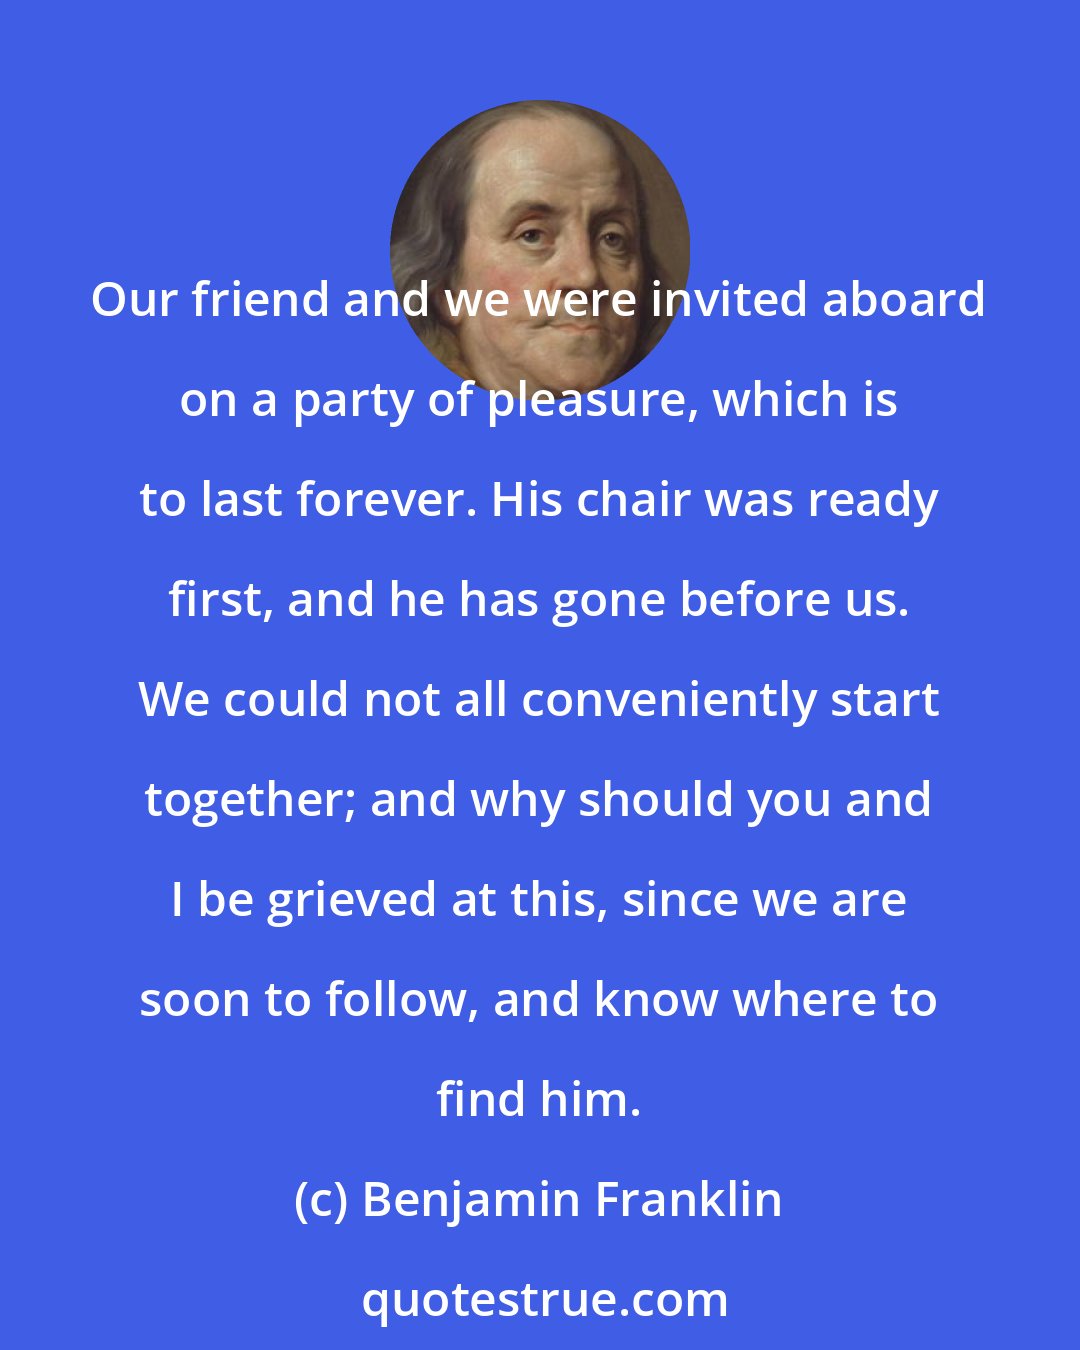 Benjamin Franklin: Our friend and we were invited aboard on a party of pleasure, which is to last forever. His chair was ready first, and he has gone before us. We could not all conveniently start together; and why should you and I be grieved at this, since we are soon to follow, and know where to find him.